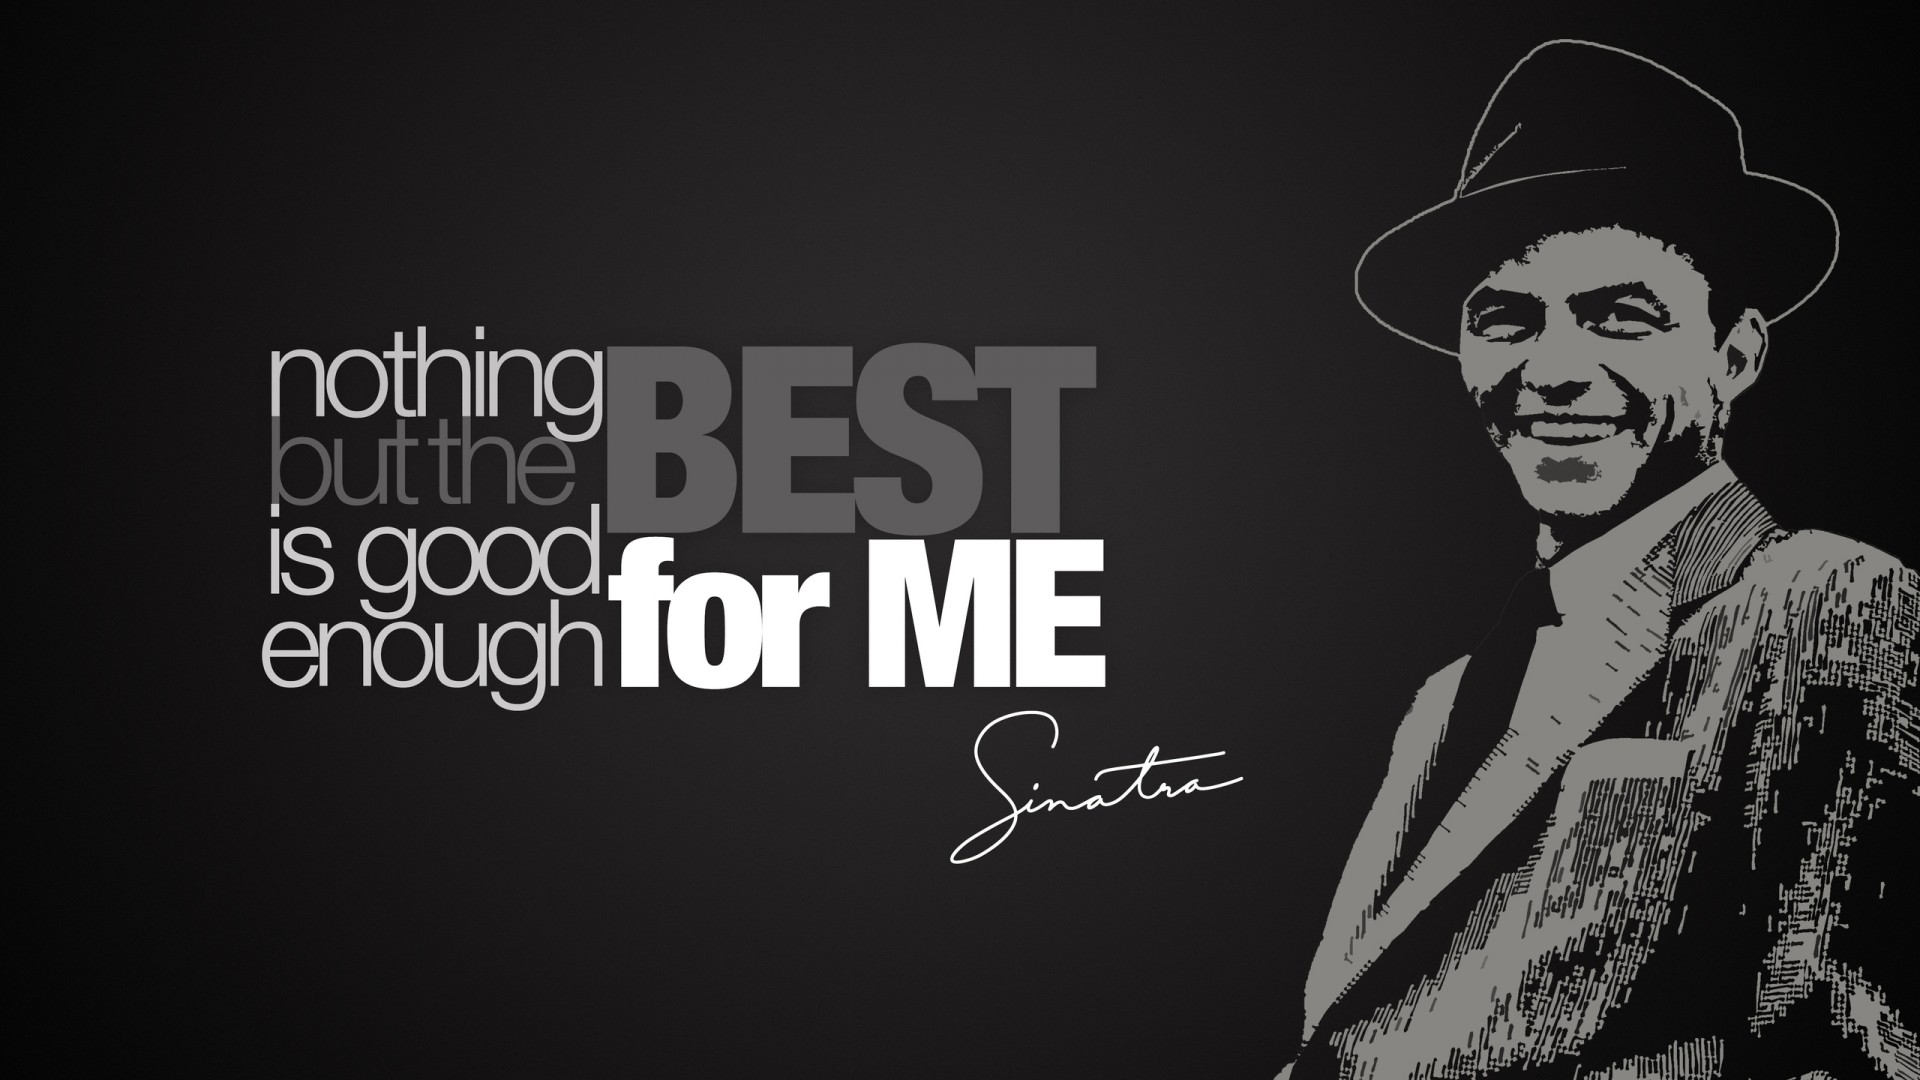 1920x1080 Frank Sinatra quote - High Definition Wallpapers - HD wallpapers